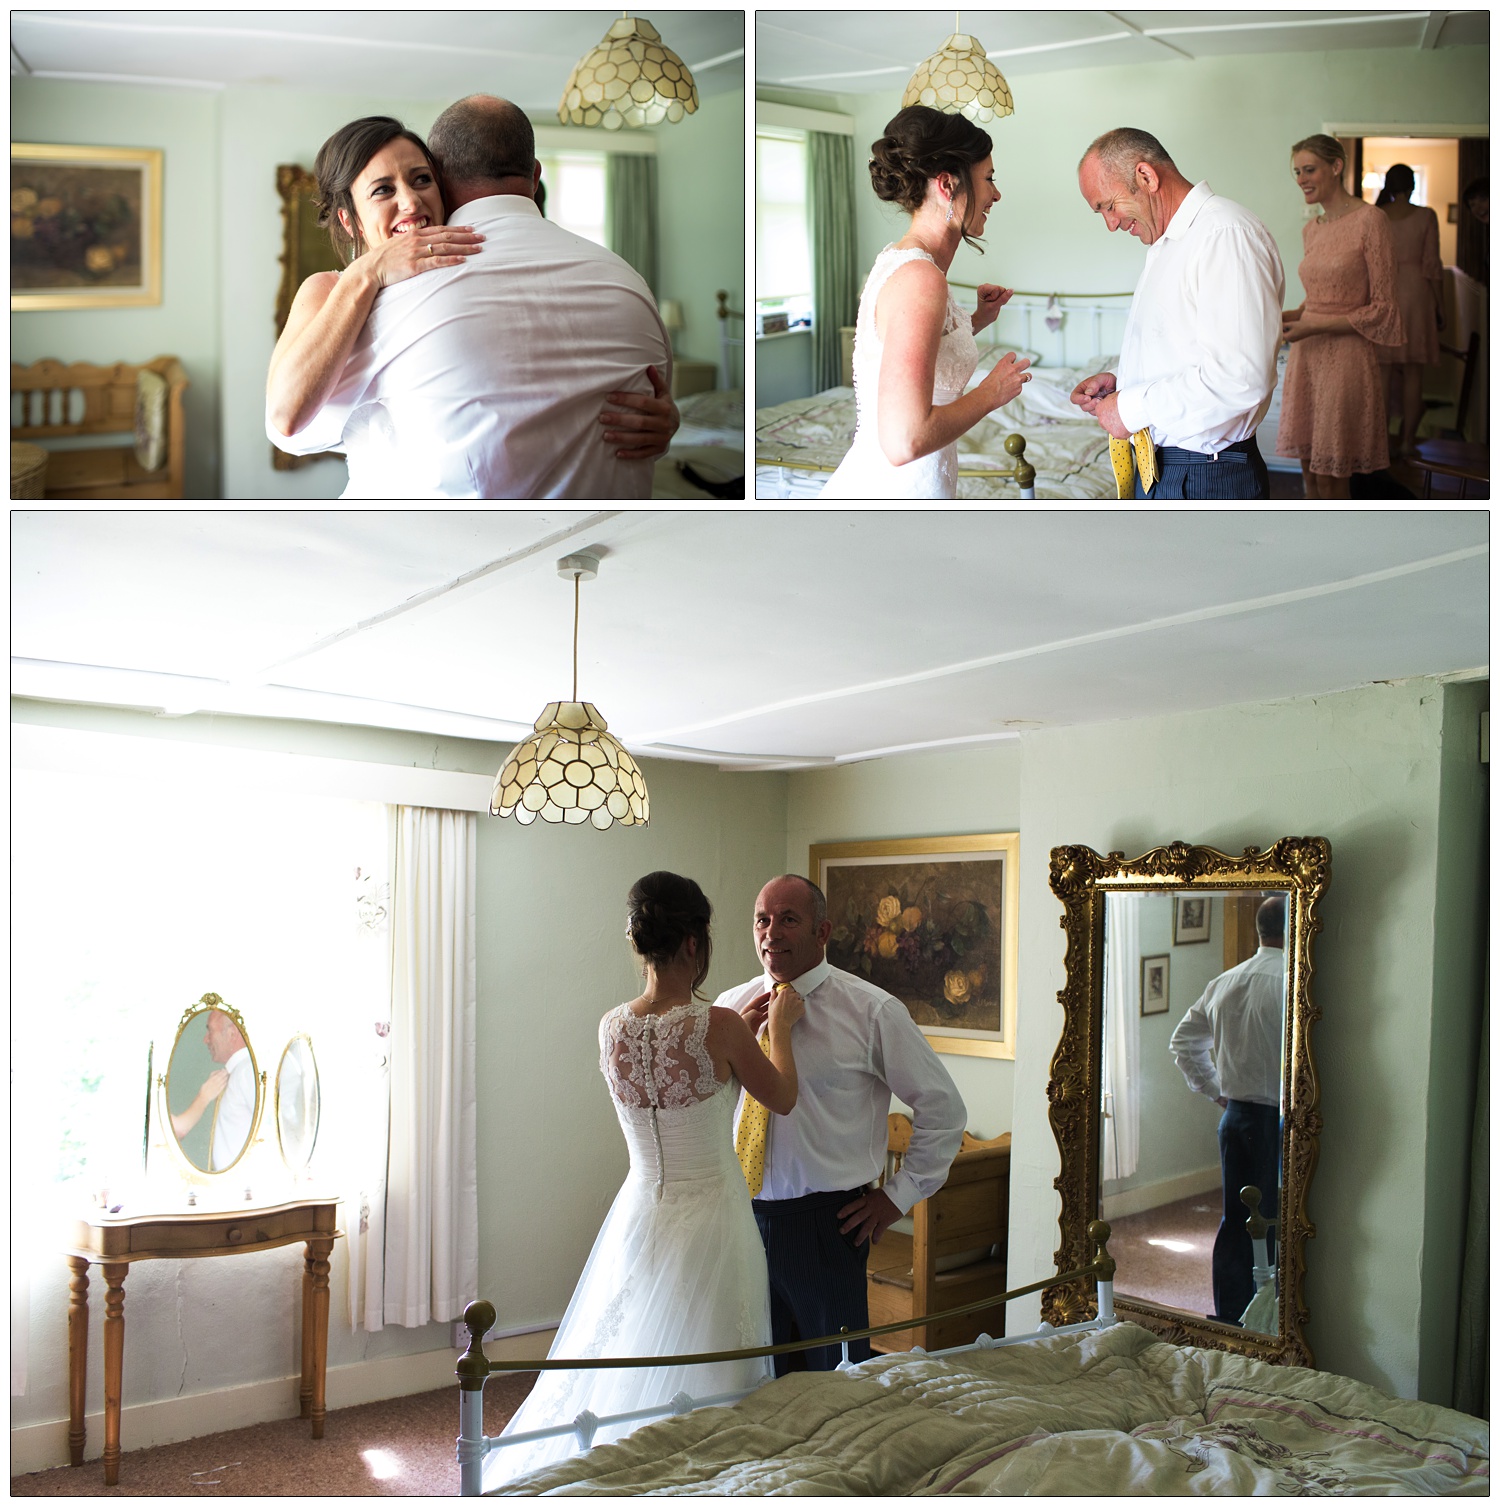 A woman in her wedding dress helps her dad do up his tie. This is reflected in a mirror. They are in a bedroom.